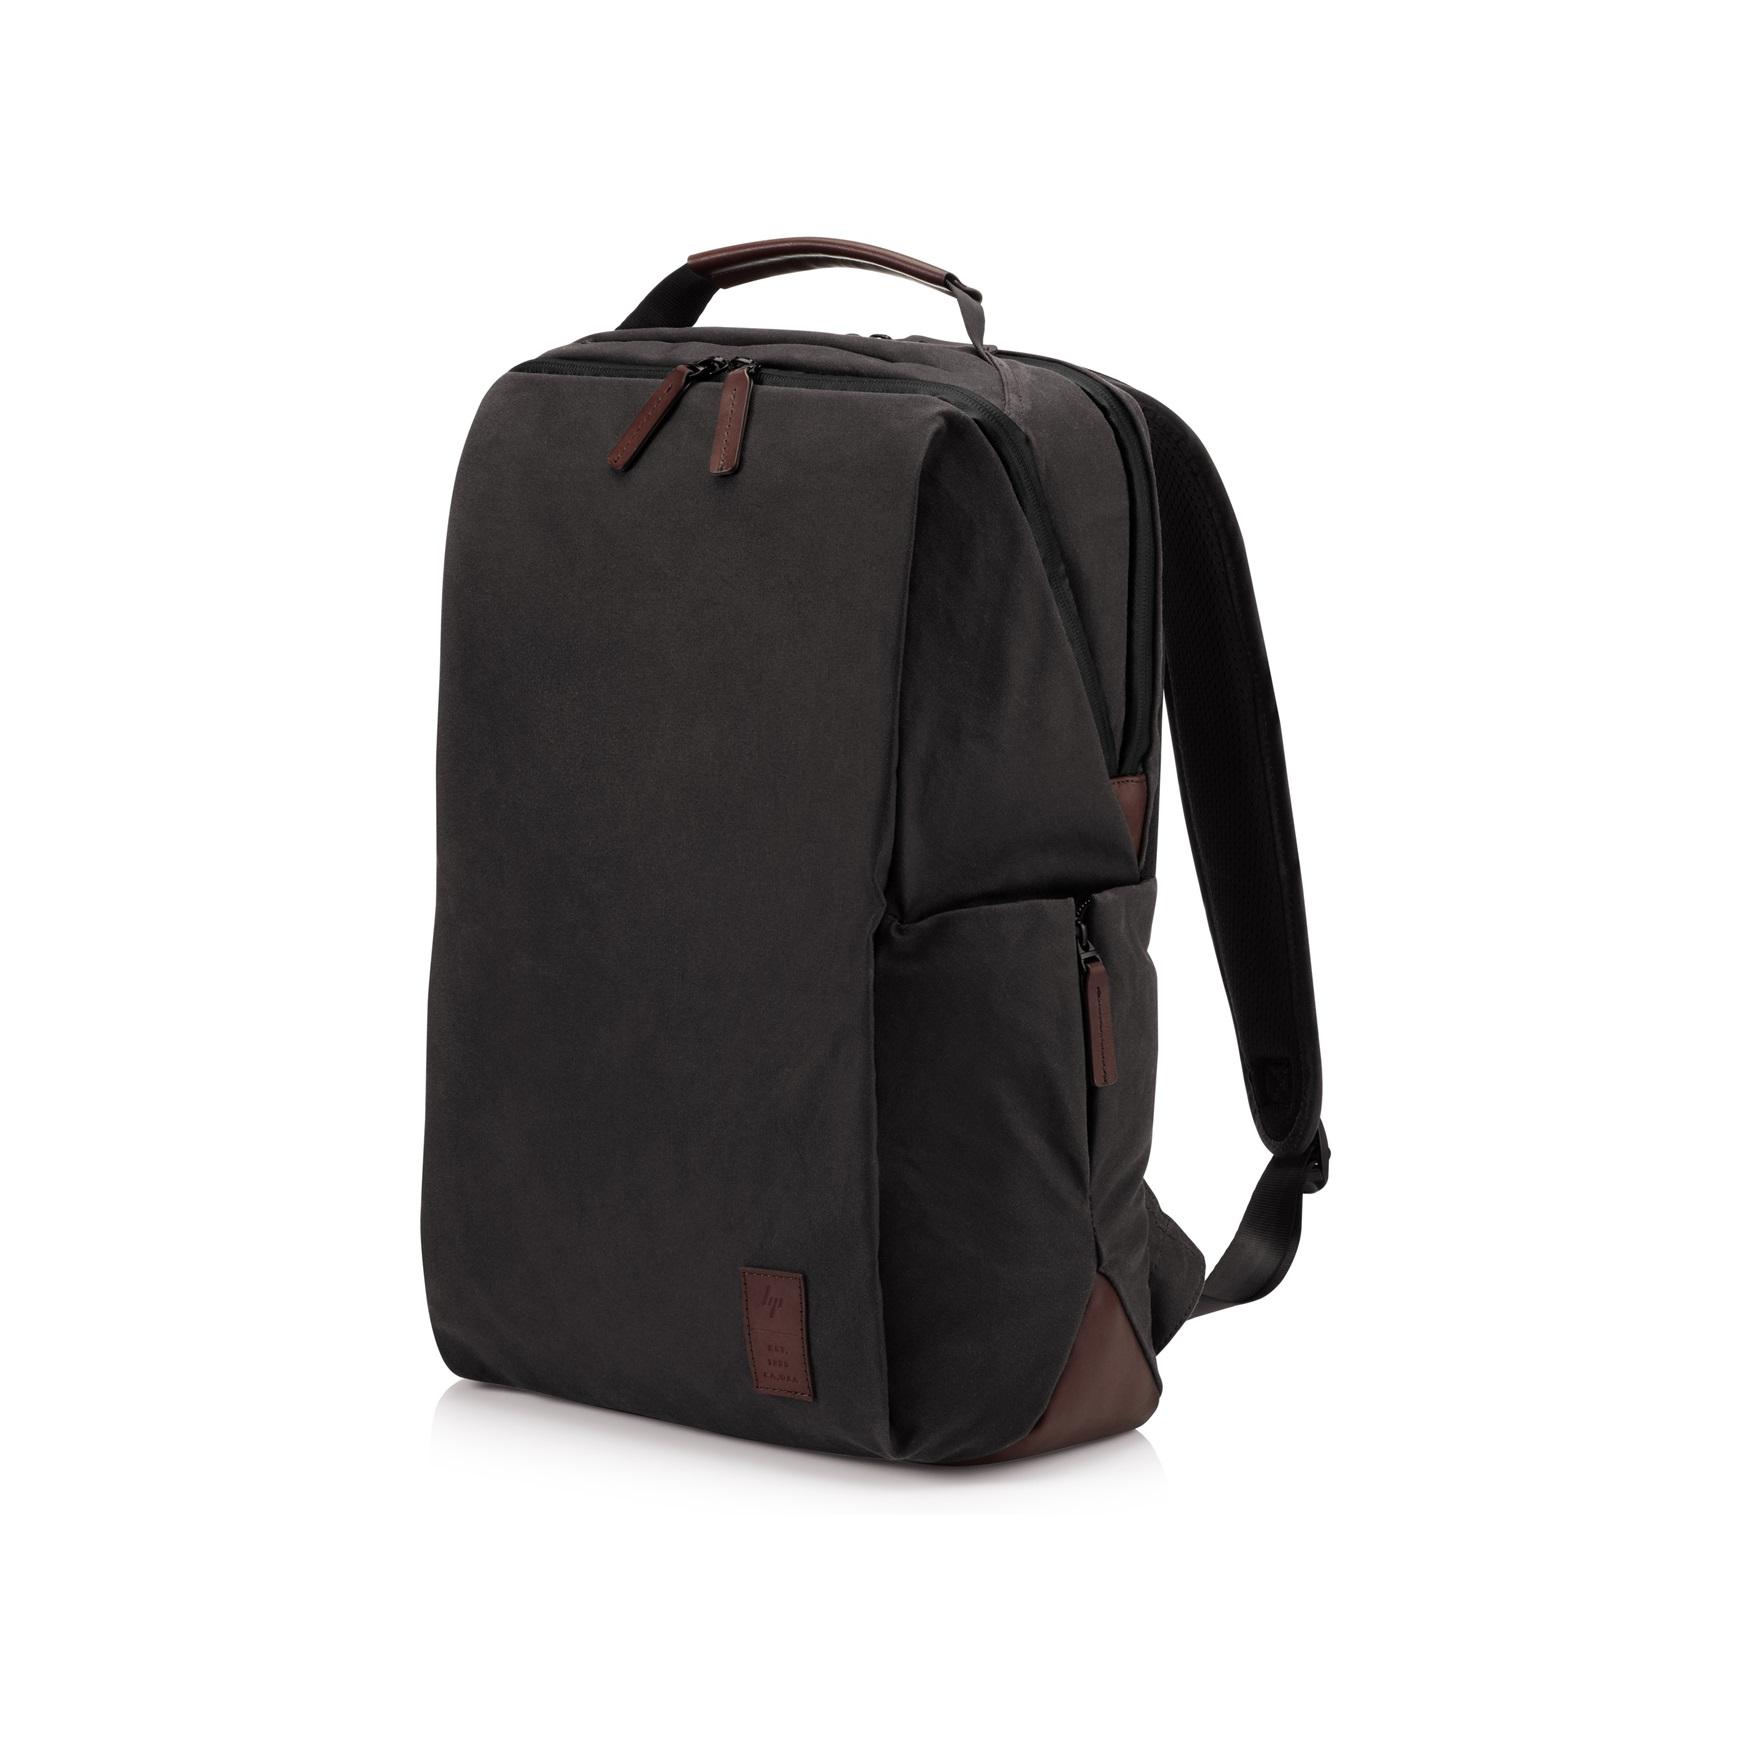 <p><strong>HP Spectre Folio WC 15 Backpack</strong> 8gf06aa</p>